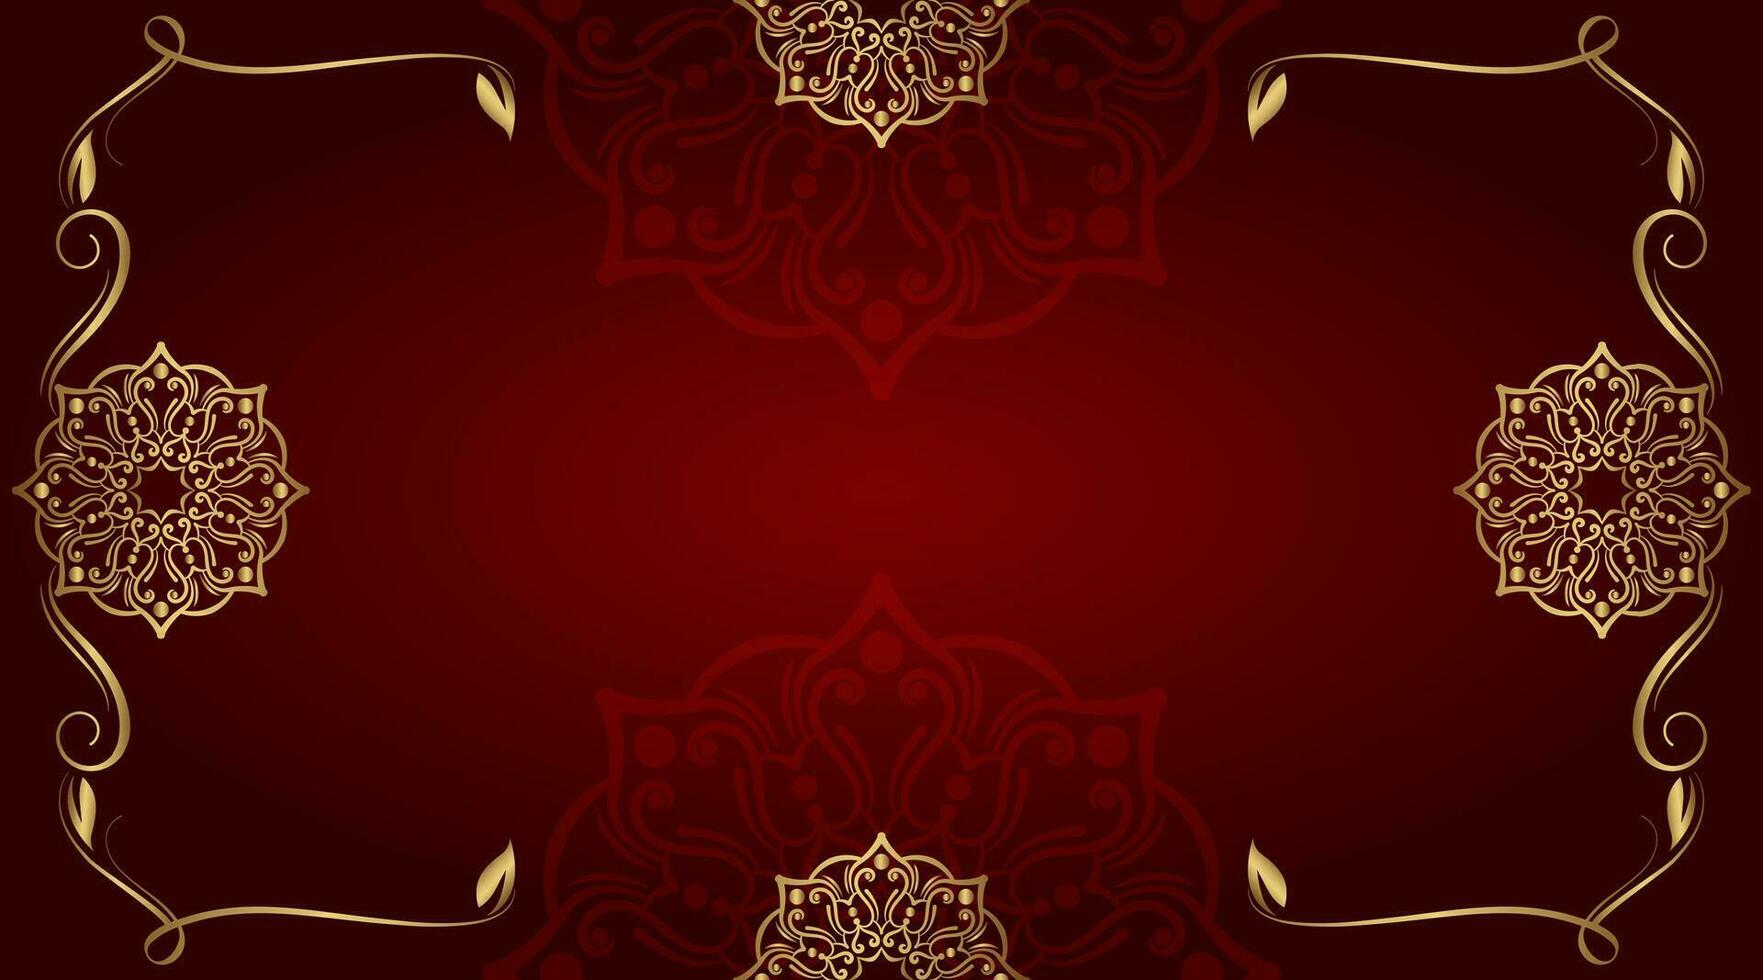 Red background with golden mandala ornament vector